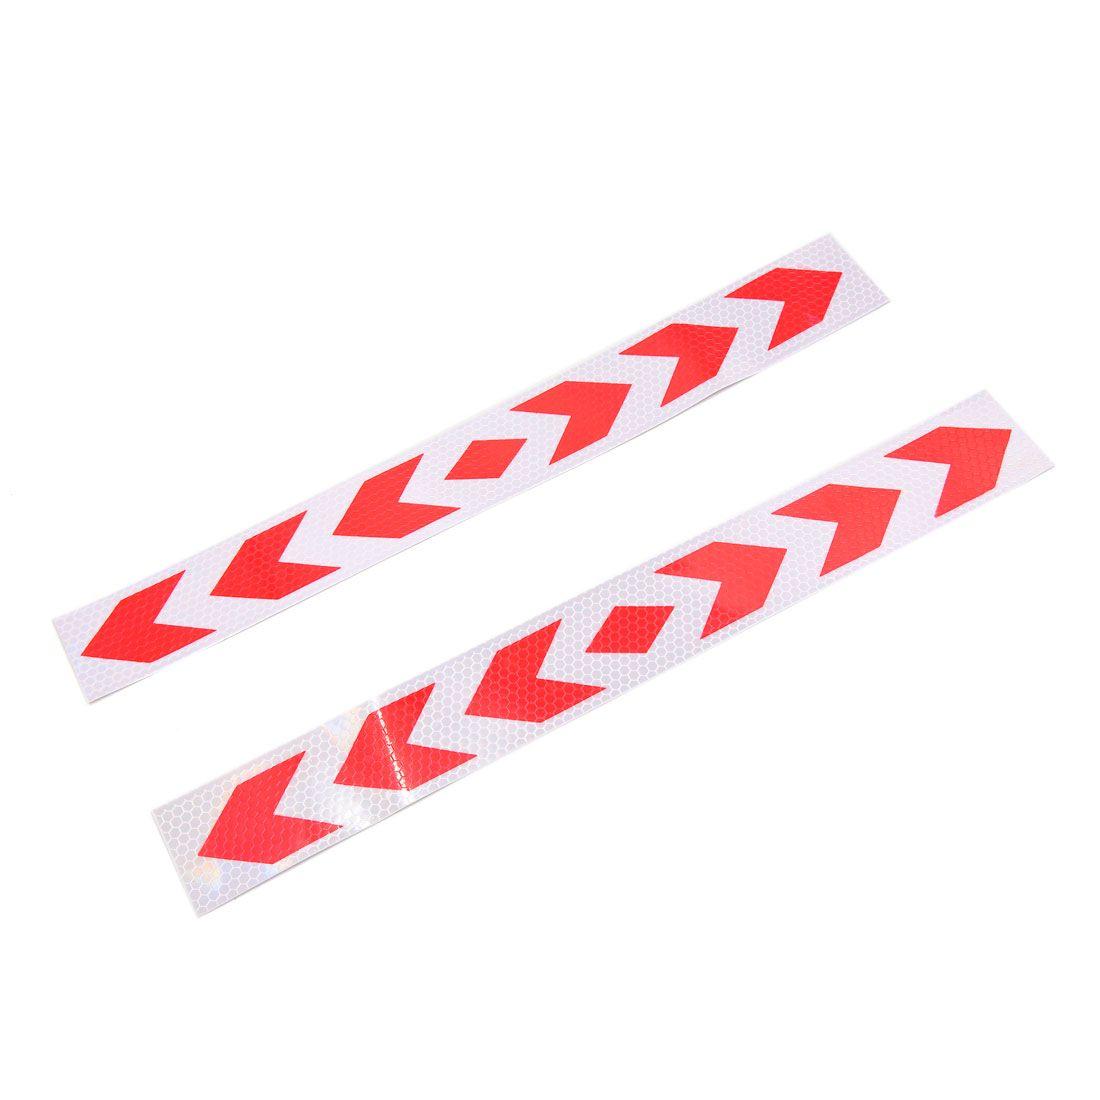 Arrows with Red and White Logo - 2Pcs Red White Arrows Pattern Car Reflective Sticker Safety Warning ...